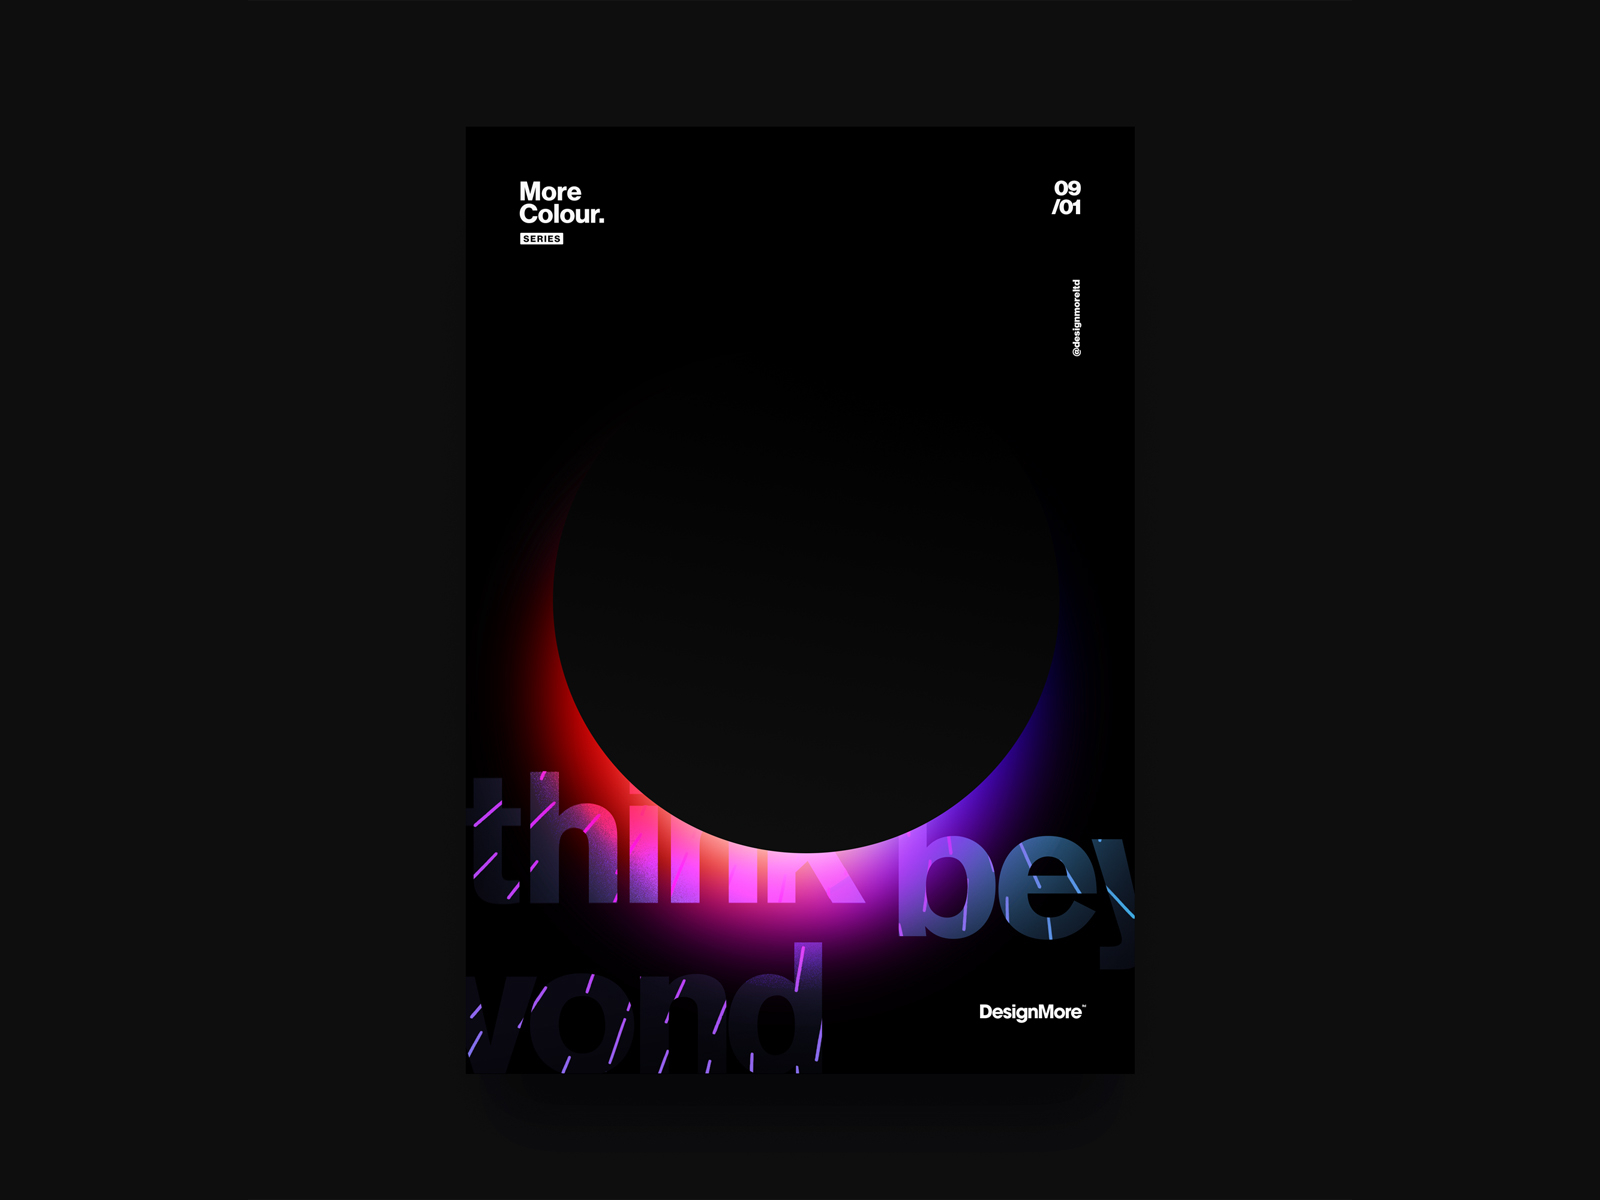 MoreColour 005 by Andy Edwards on Dribbble